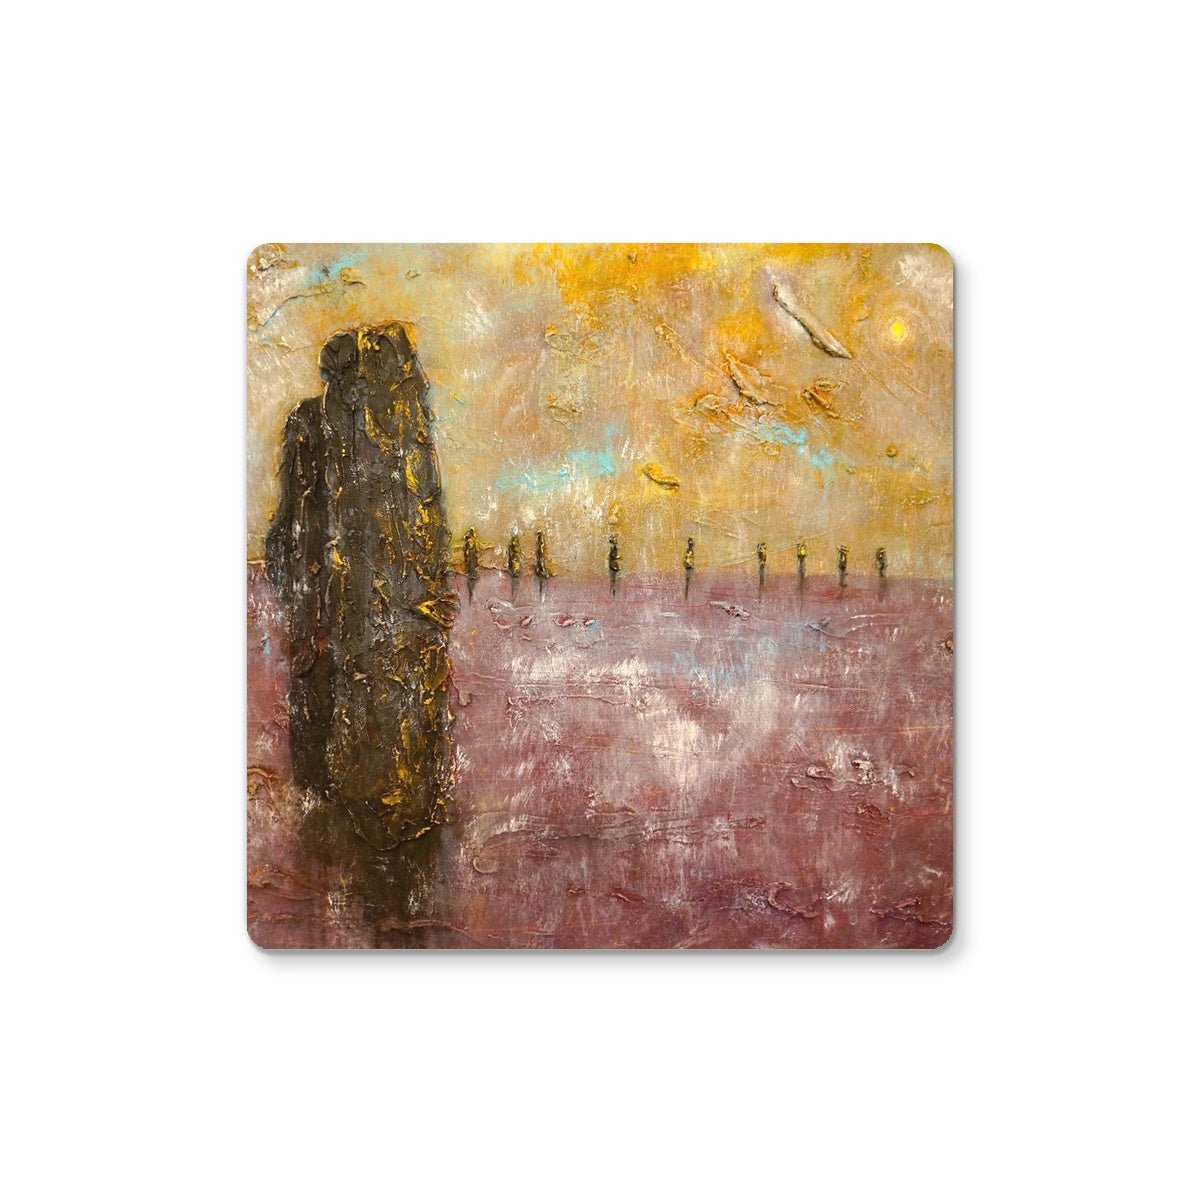 Bordgar Mist Orkney Art Gifts Coaster-Coasters-Orkney Art Gallery-2 Coasters-Paintings, Prints, Homeware, Art Gifts From Scotland By Scottish Artist Kevin Hunter